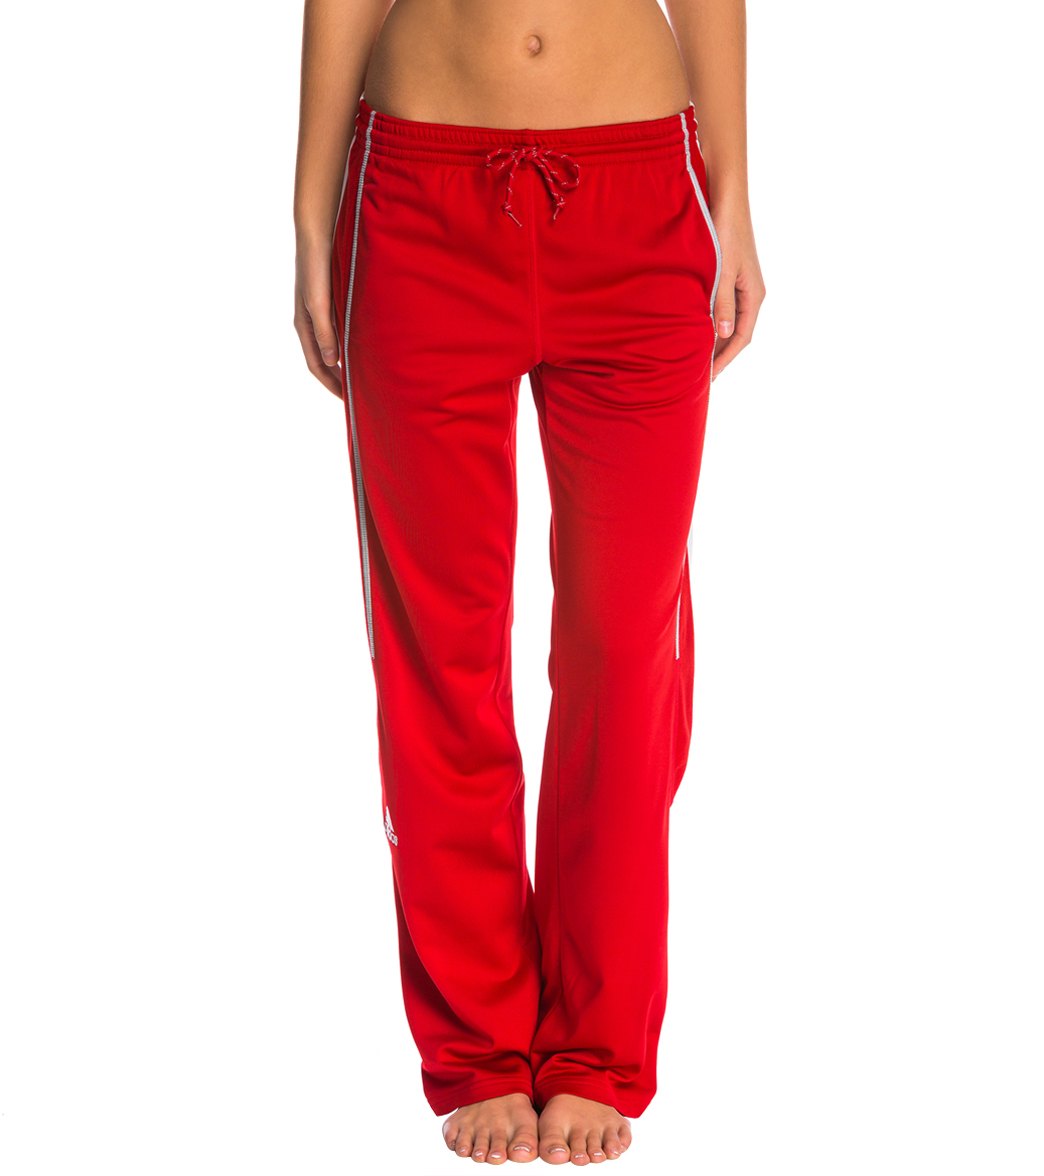 Adidas Women's Utility Warm Up Pants - Red Xl Polyester - Swimoutlet.com